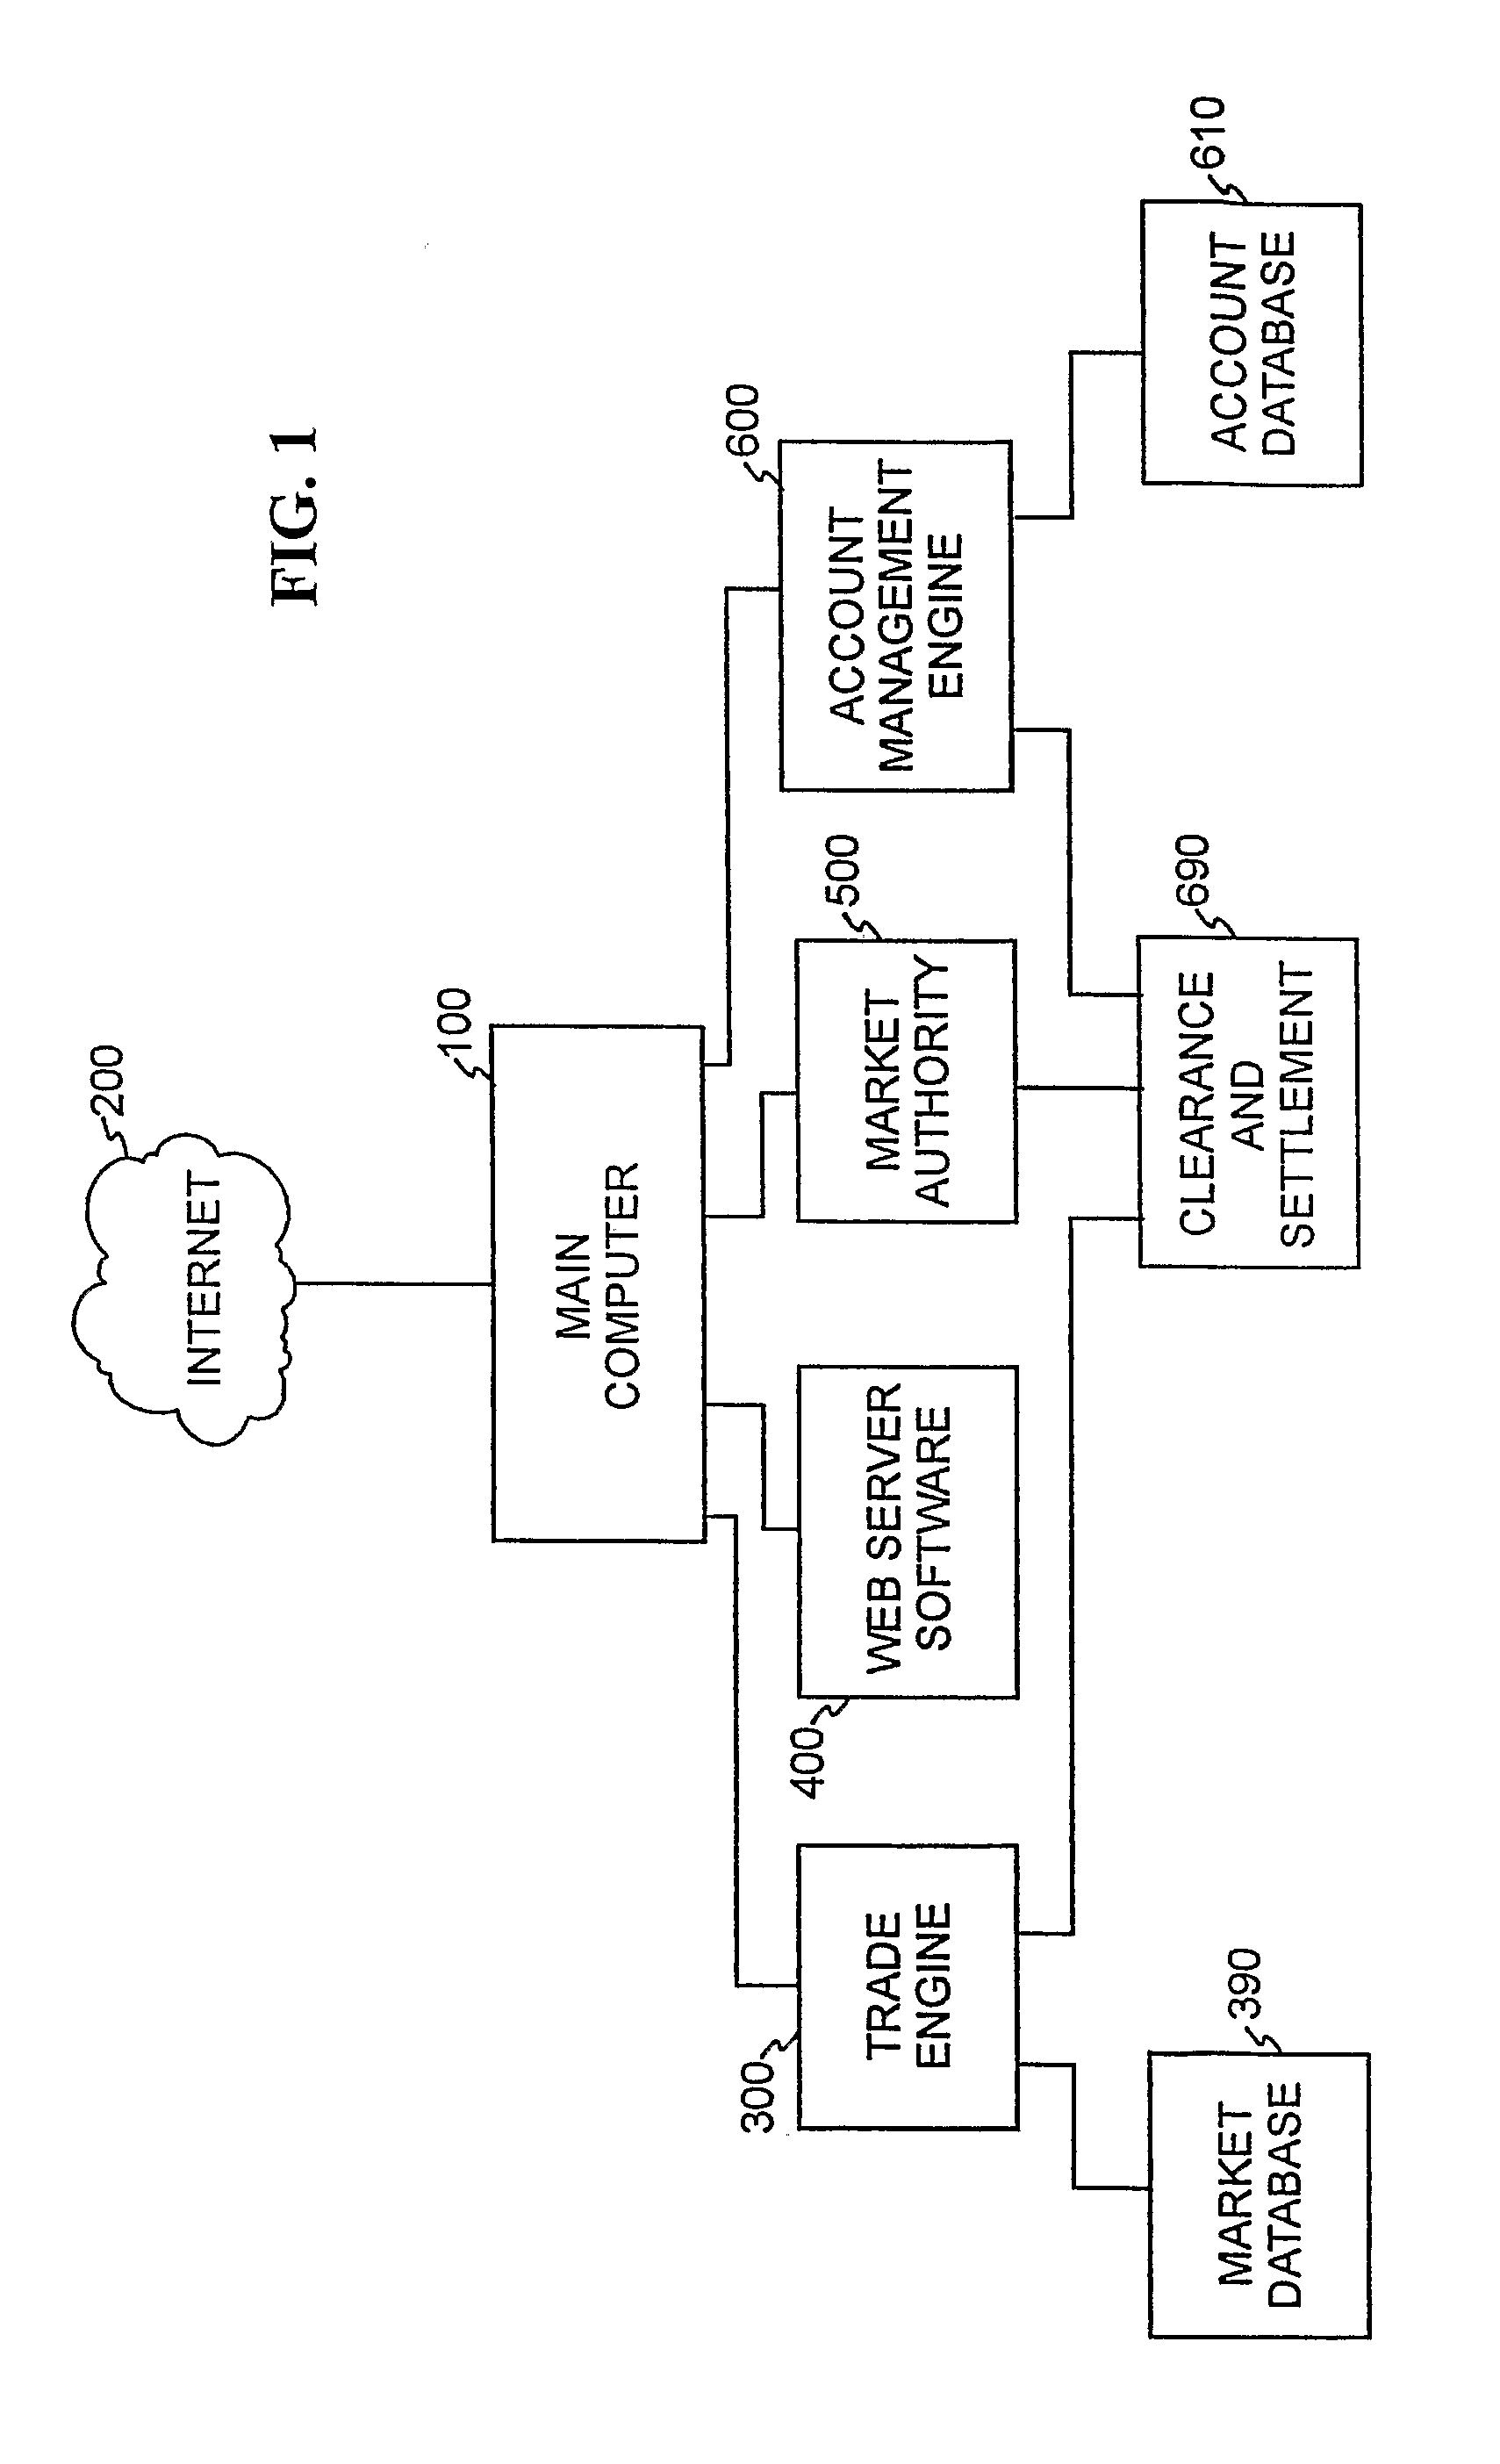 Risk management contracts and method and apparatus for trading same